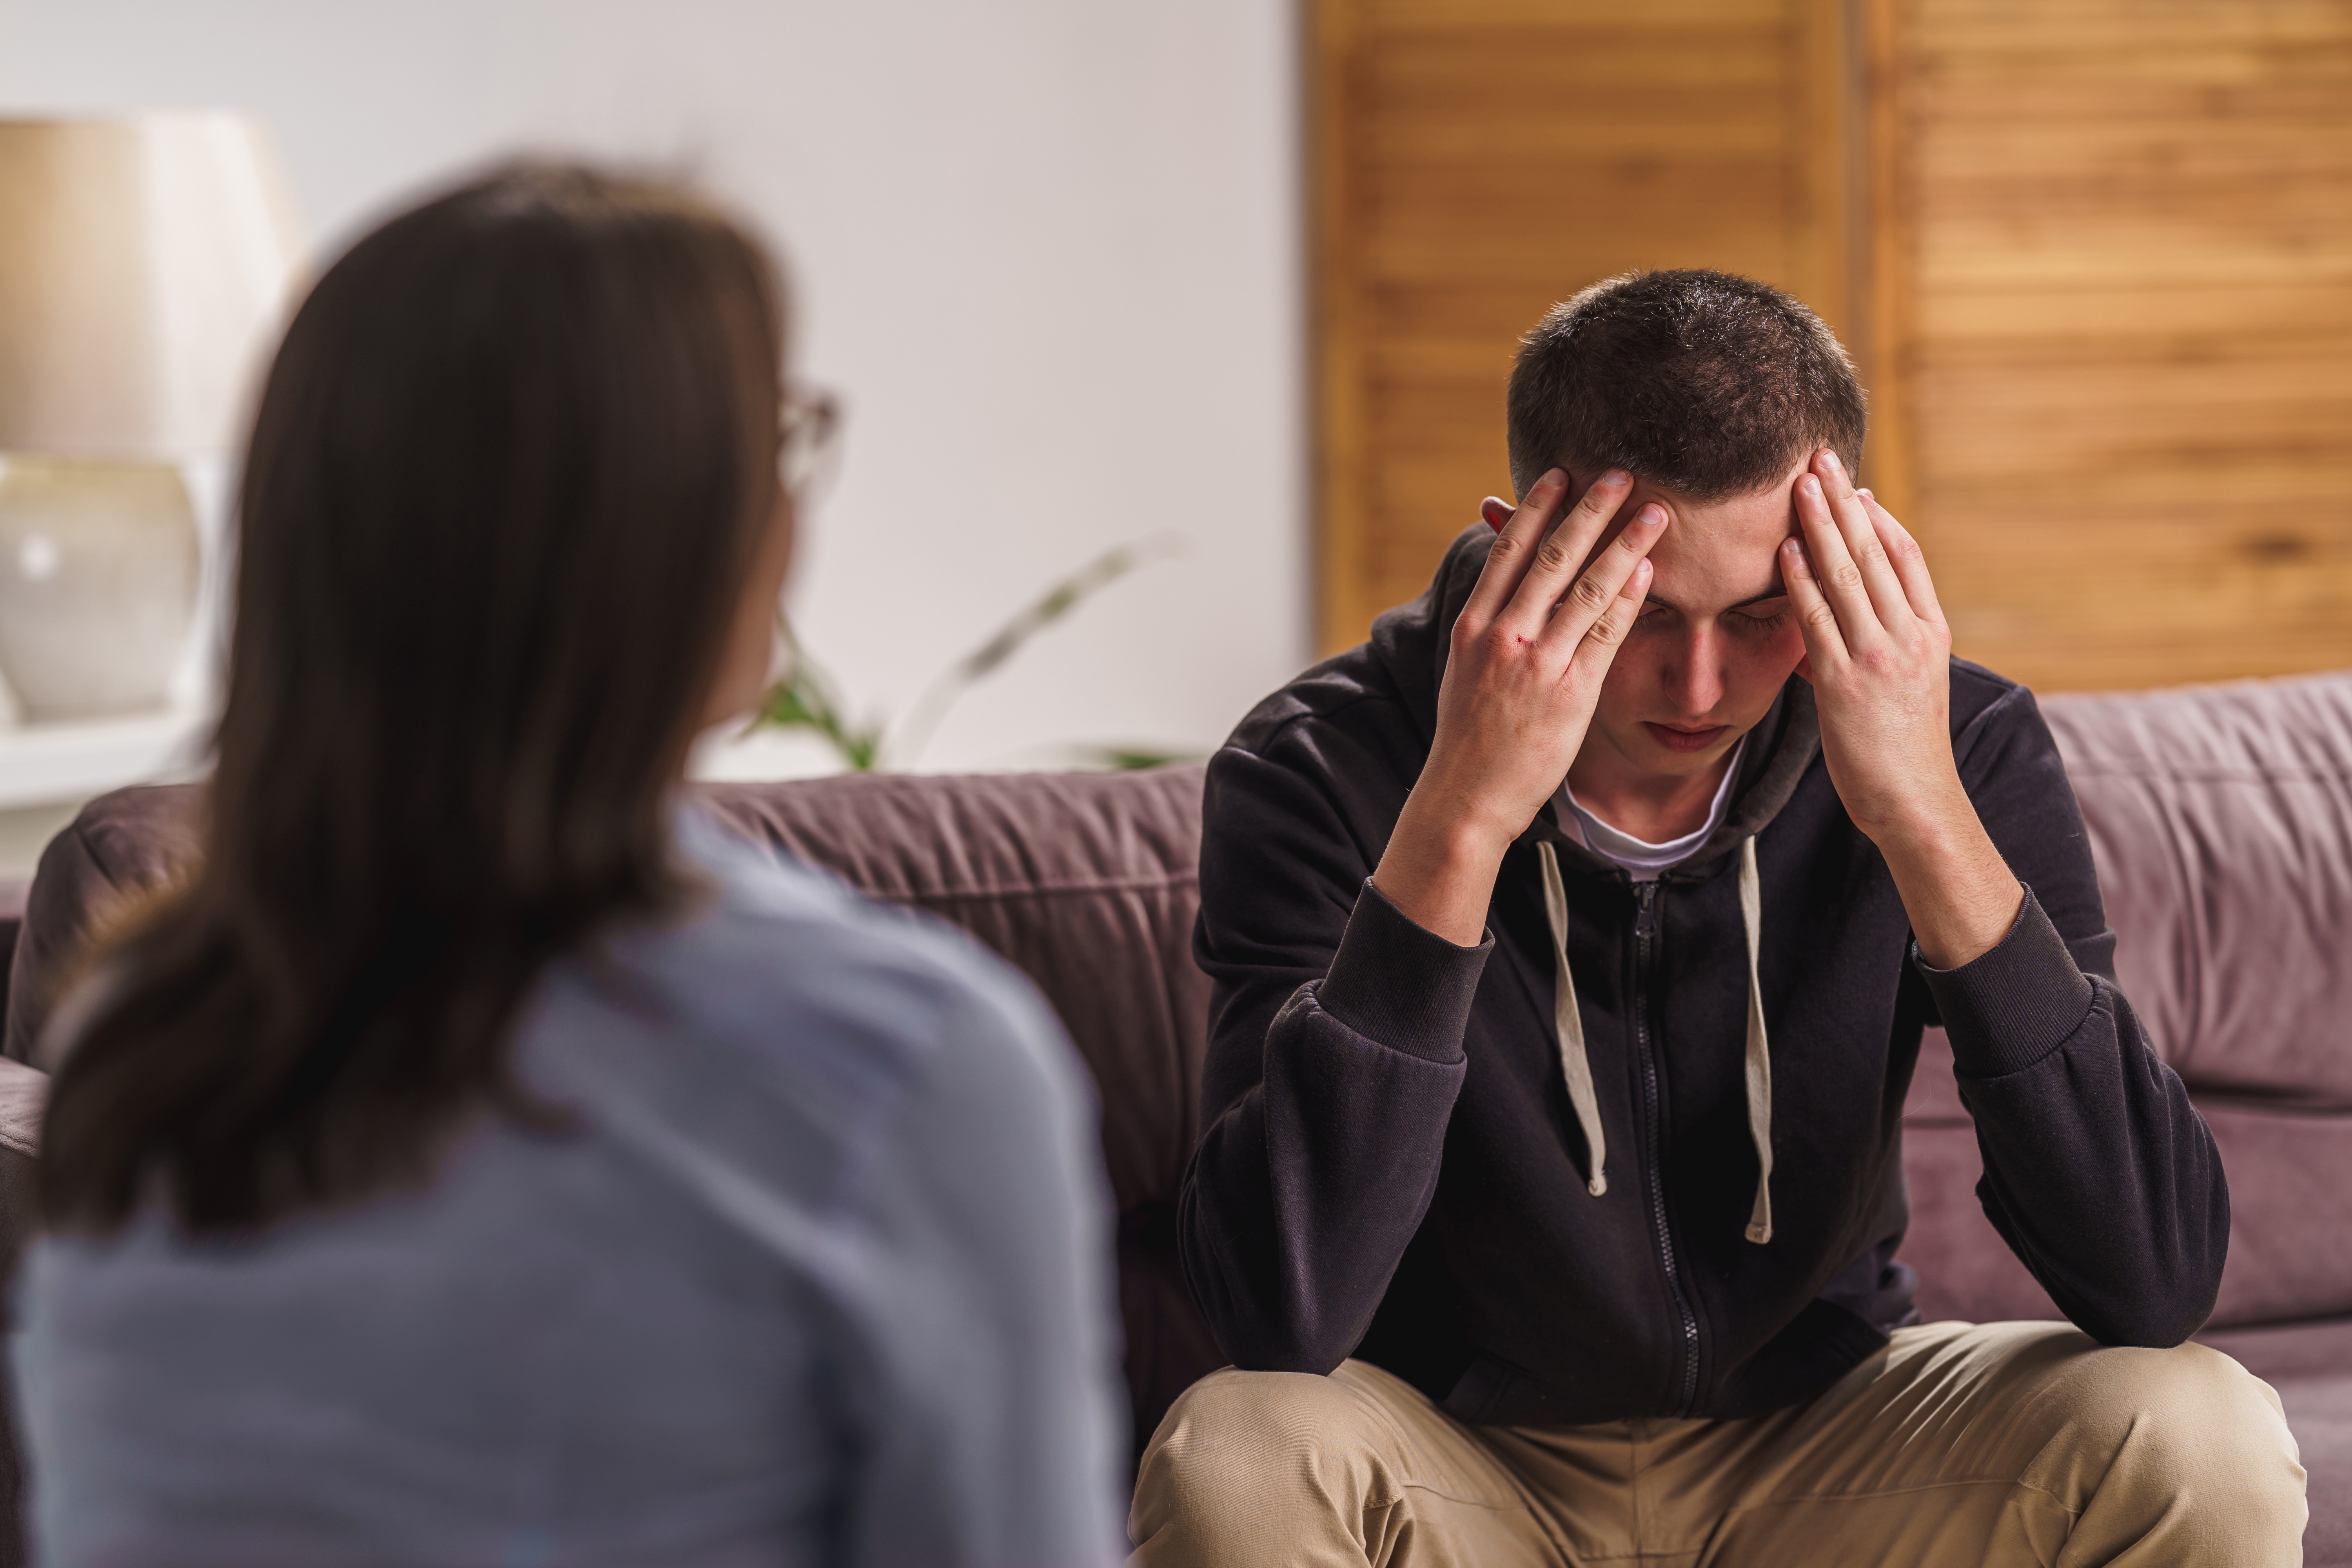 A teenage boy looking sad while speaking to a woman | Source: Shutterstock